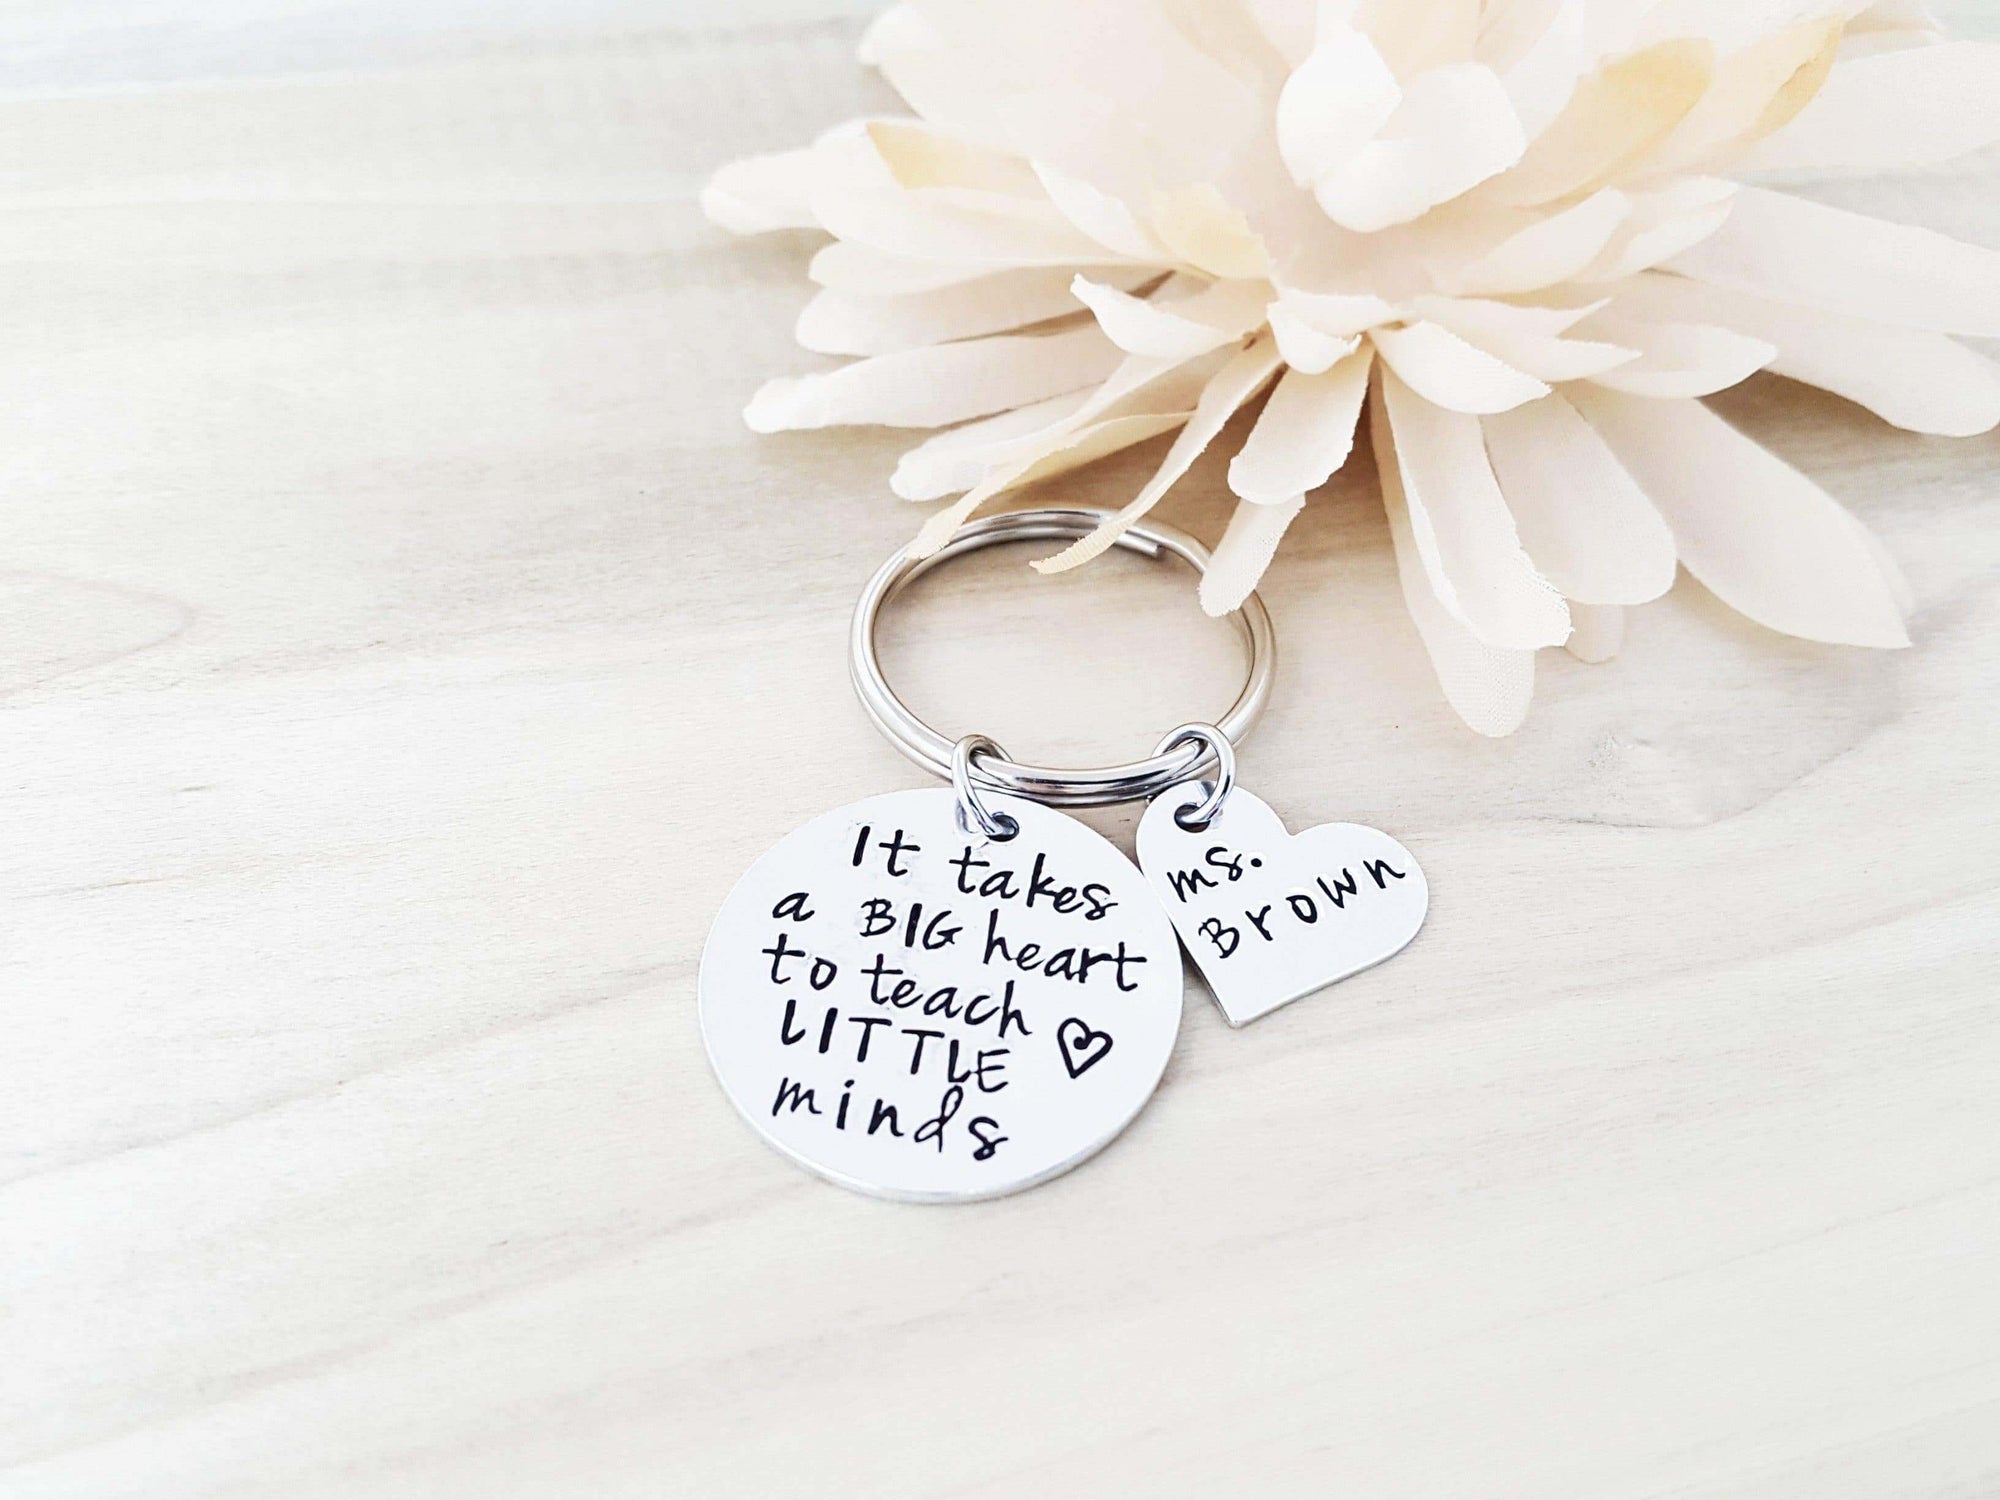 Big Heart to Teach, Teacher Gift, End of Year Gift, #1 Teacher, School Teacher, Son's Teacher, Keychains, HandmadeLoveStories, HandmadeLoveStories , [Handmade_Love_Stories], [Hand_Stamped_Jewelry], [Etsy_Stamped_Jewelry], [Etsy_Jewelry]